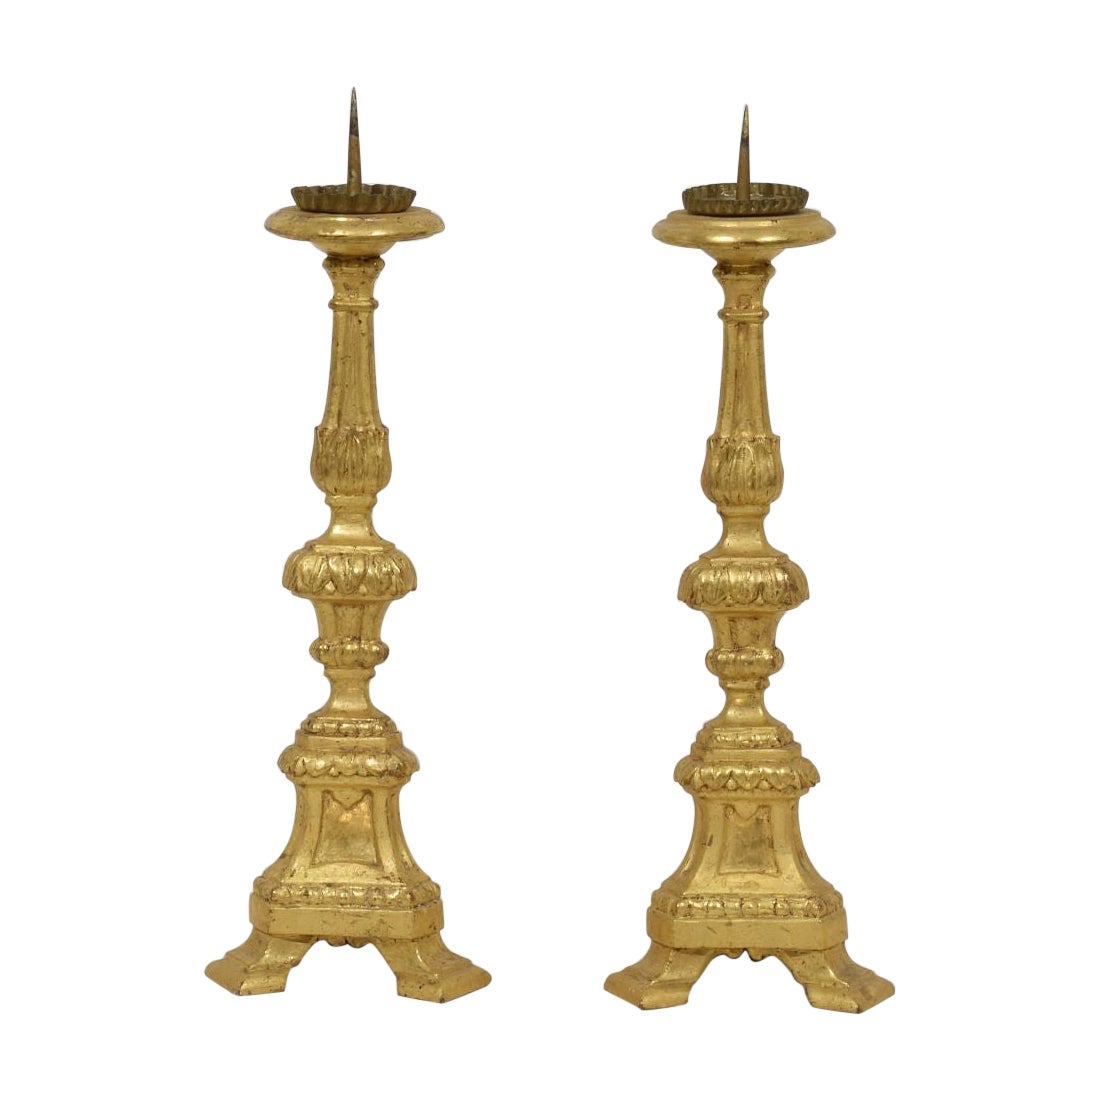 Couple of Late 18th Century Italian Neoclassical Giltwood Candleholders